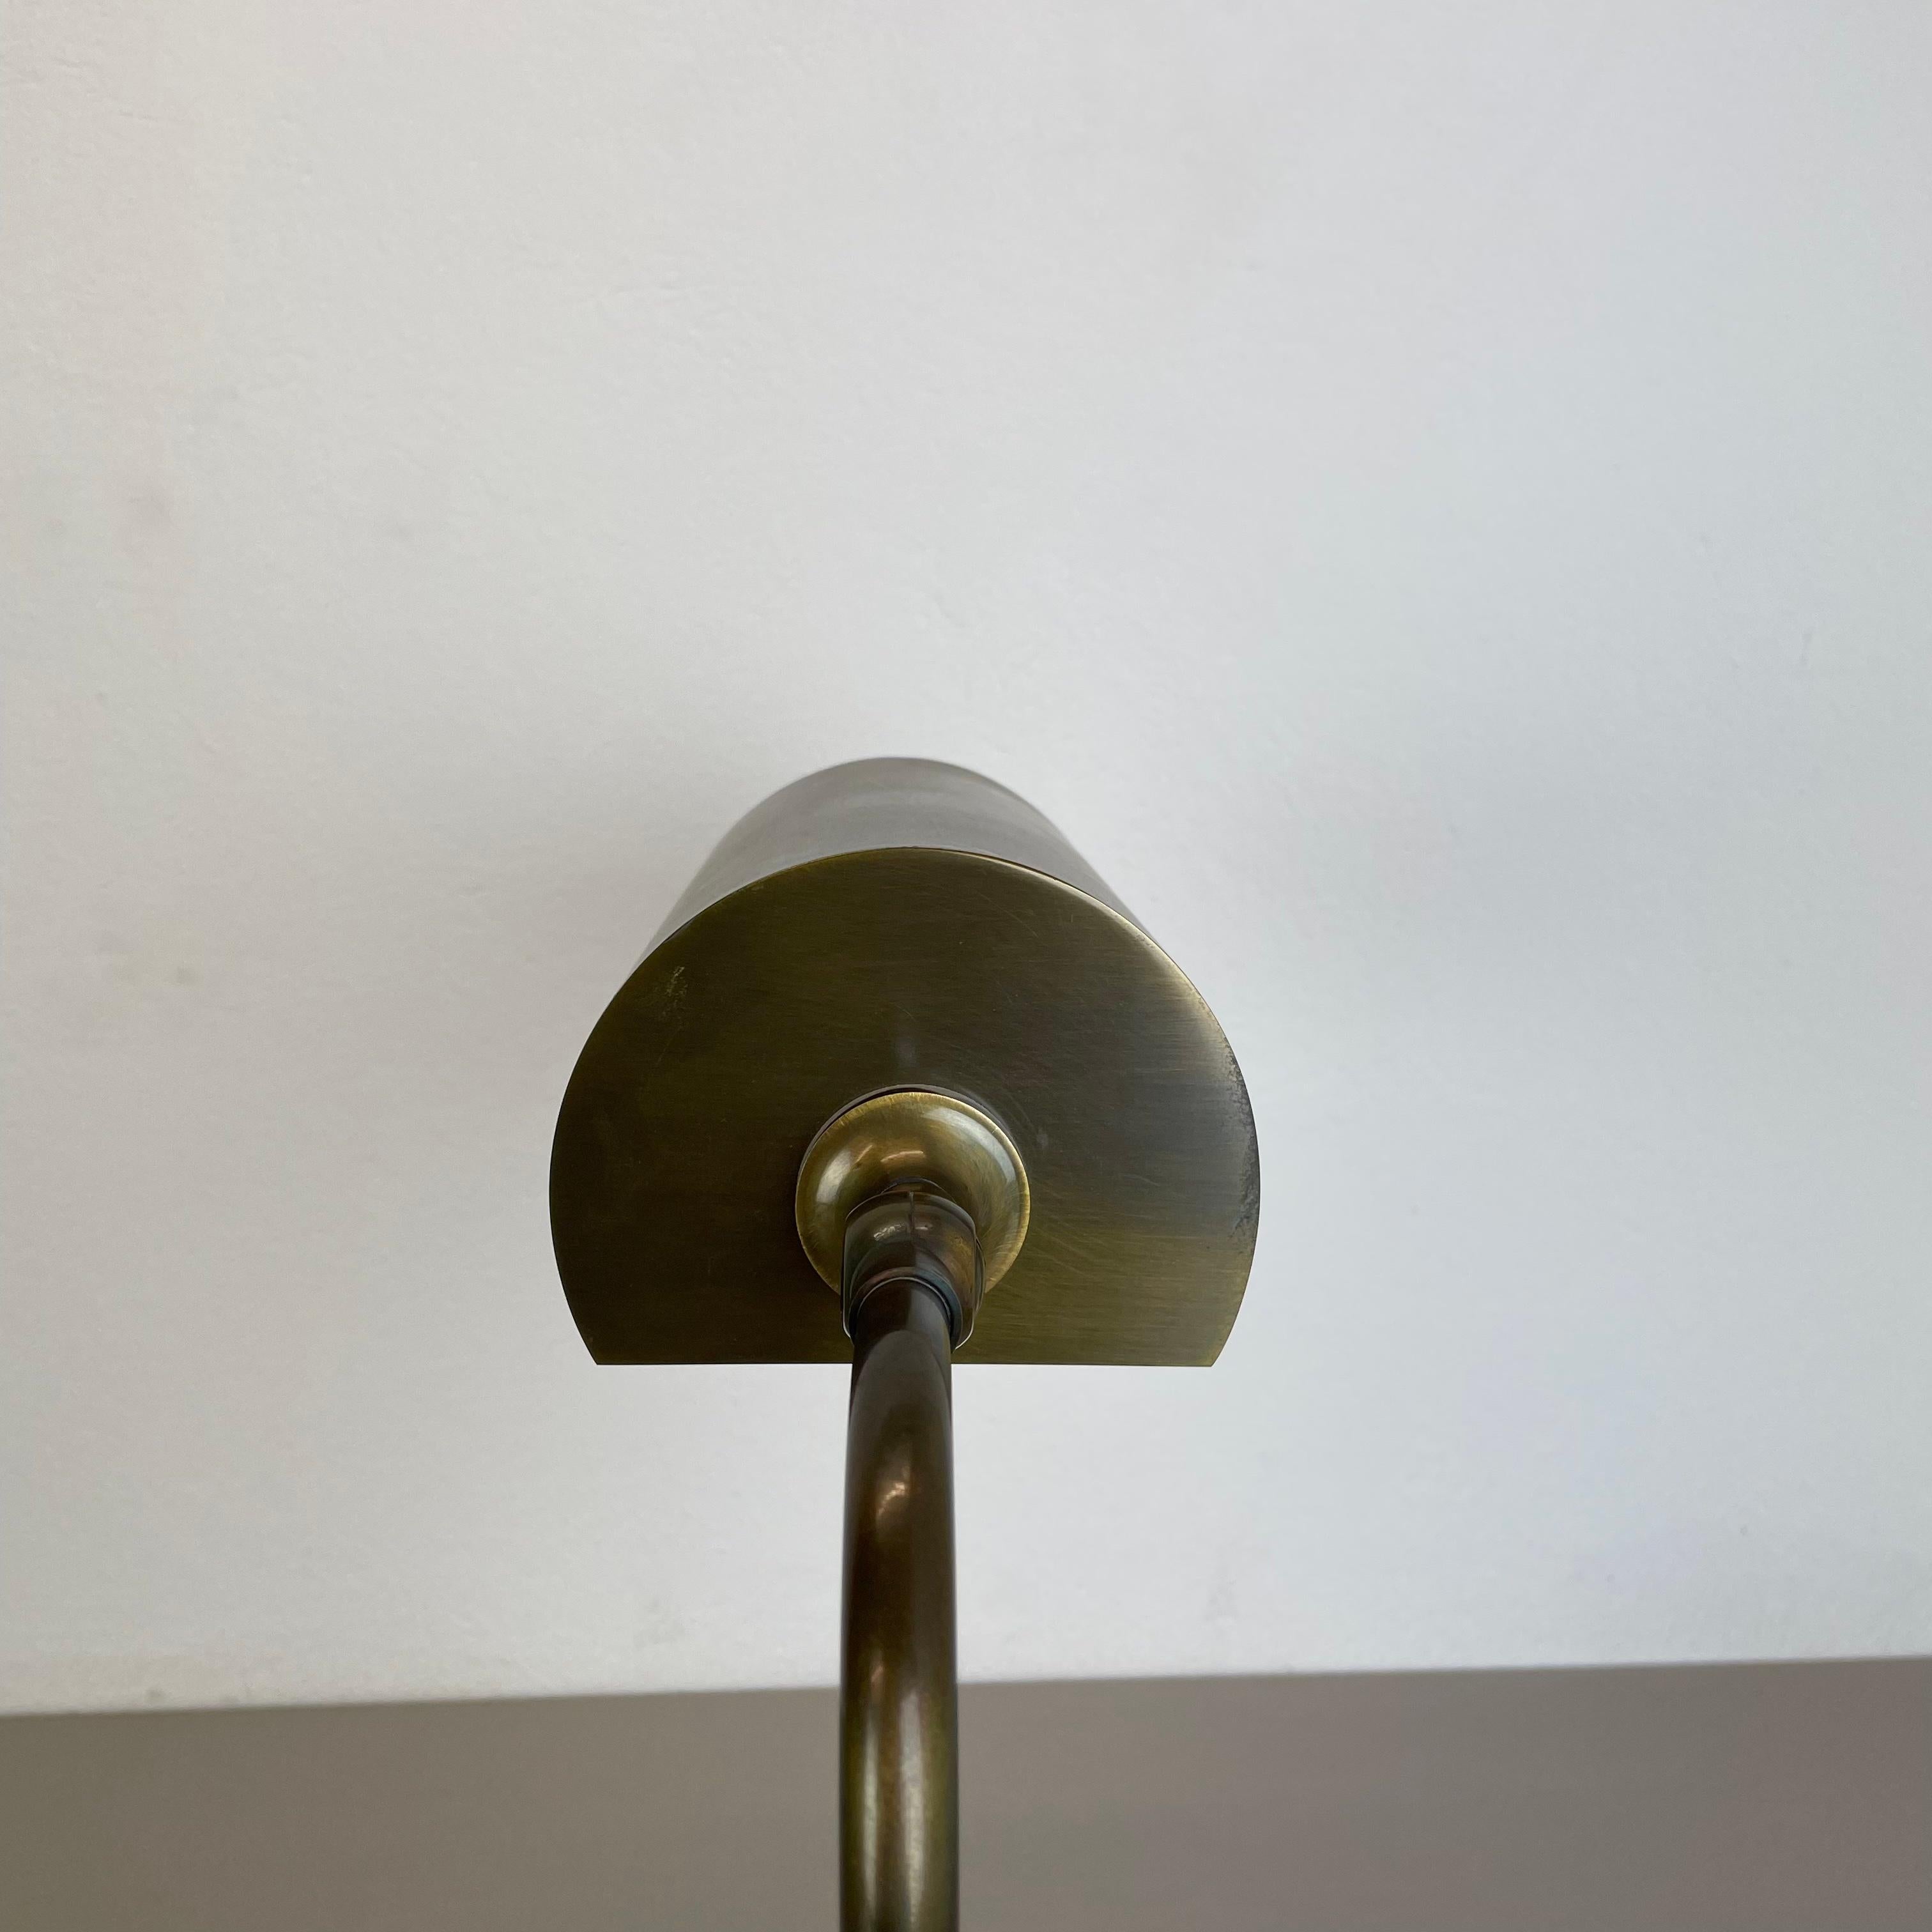 Beautiful Cubic Original Modernist Brass Metal Table Light, Germany, 1970s For Sale 9